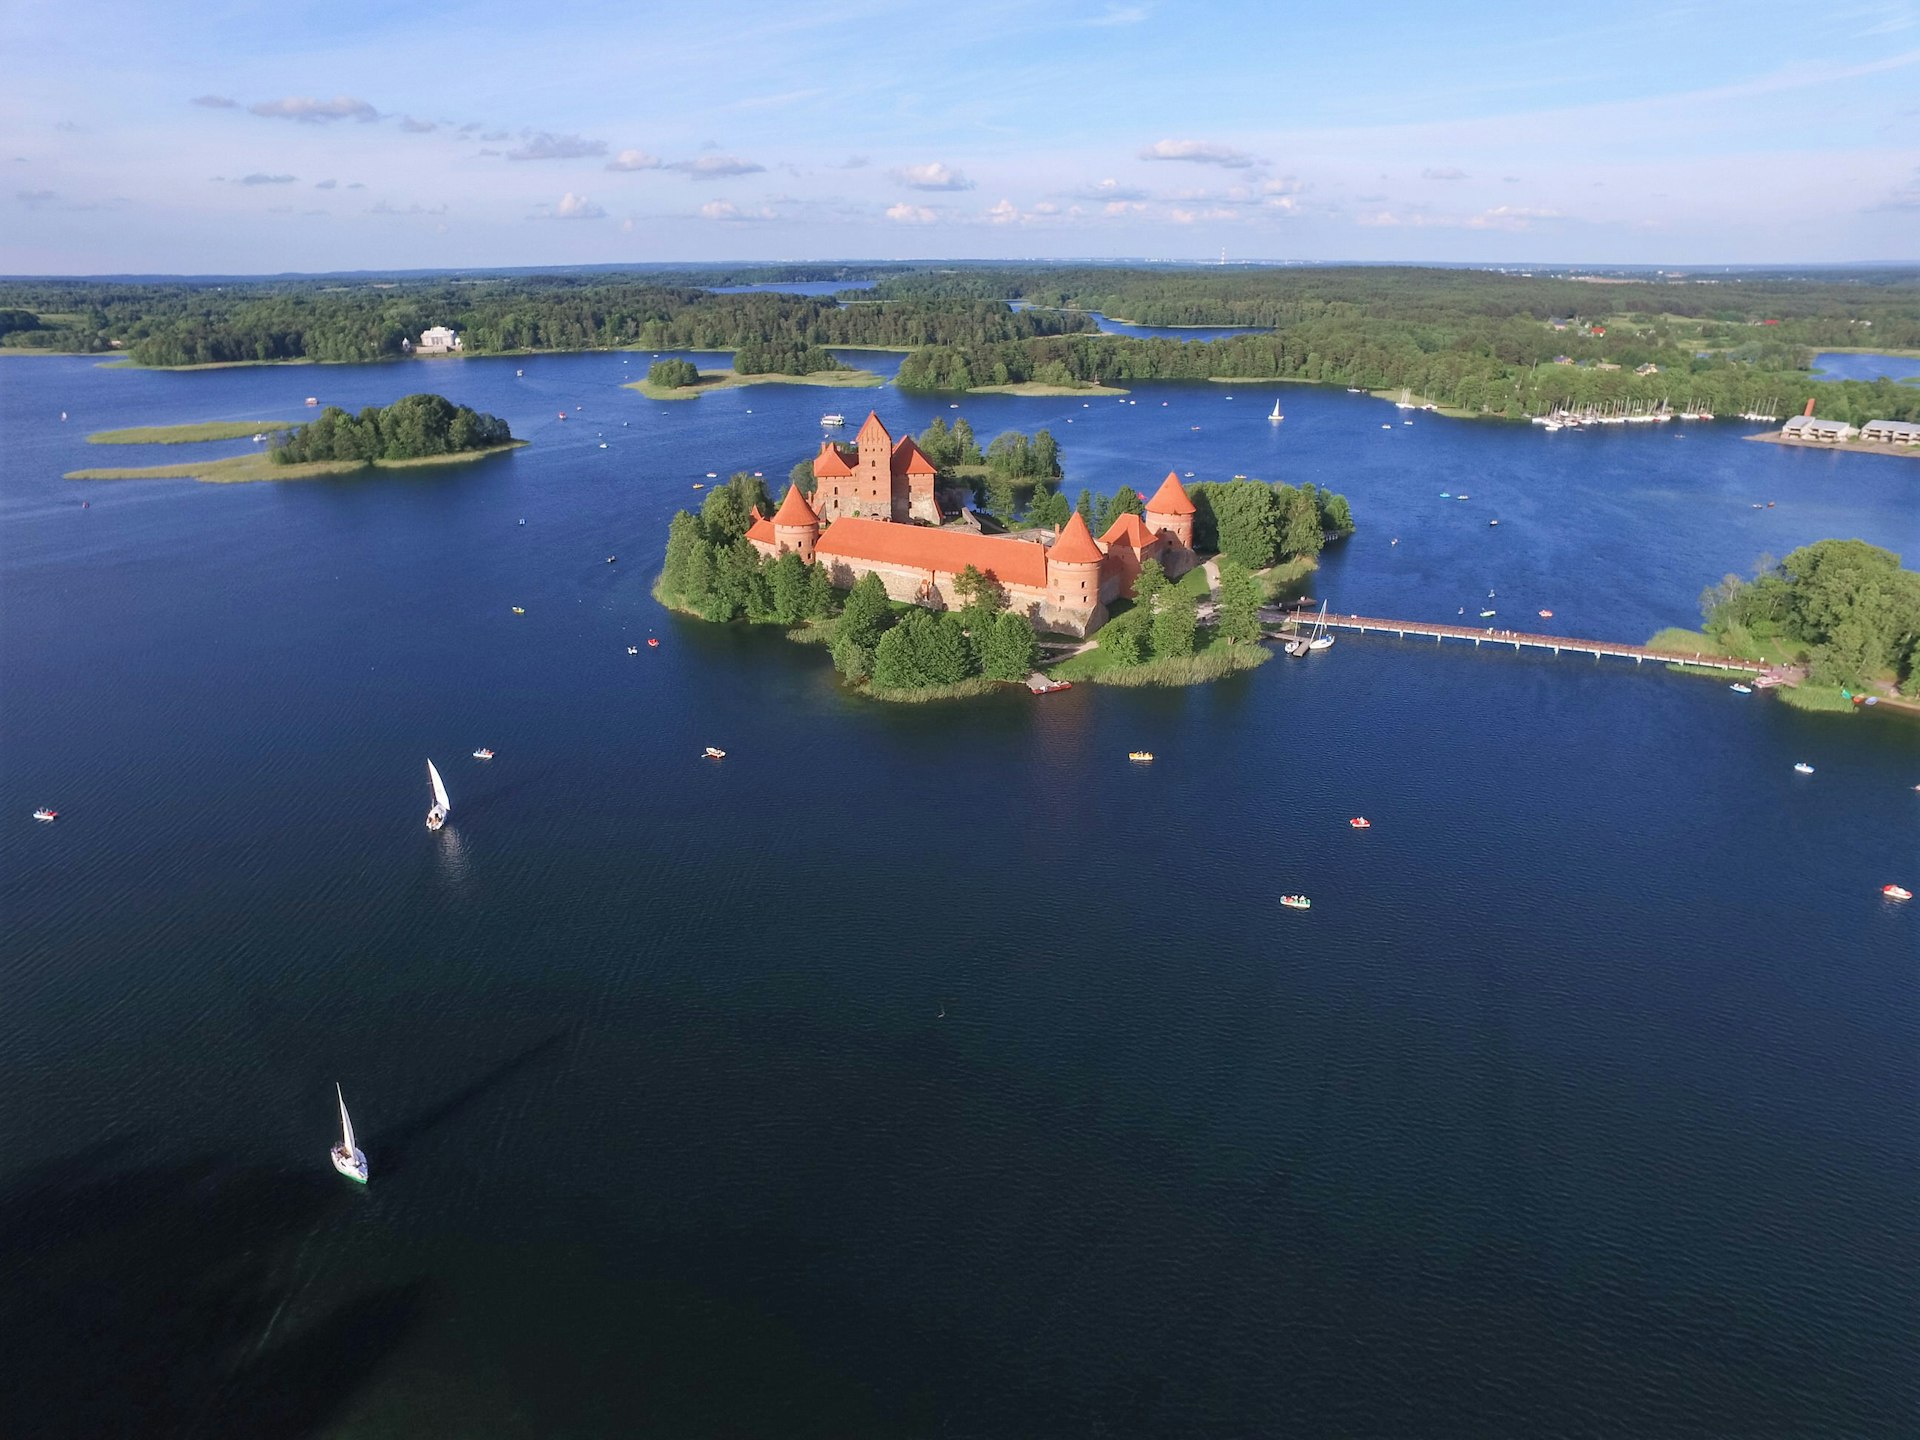 Aerial view of Trakai Island Castle, with small boats sailing in the surrounding lake © Audrius Merfeldas / Shutterstock